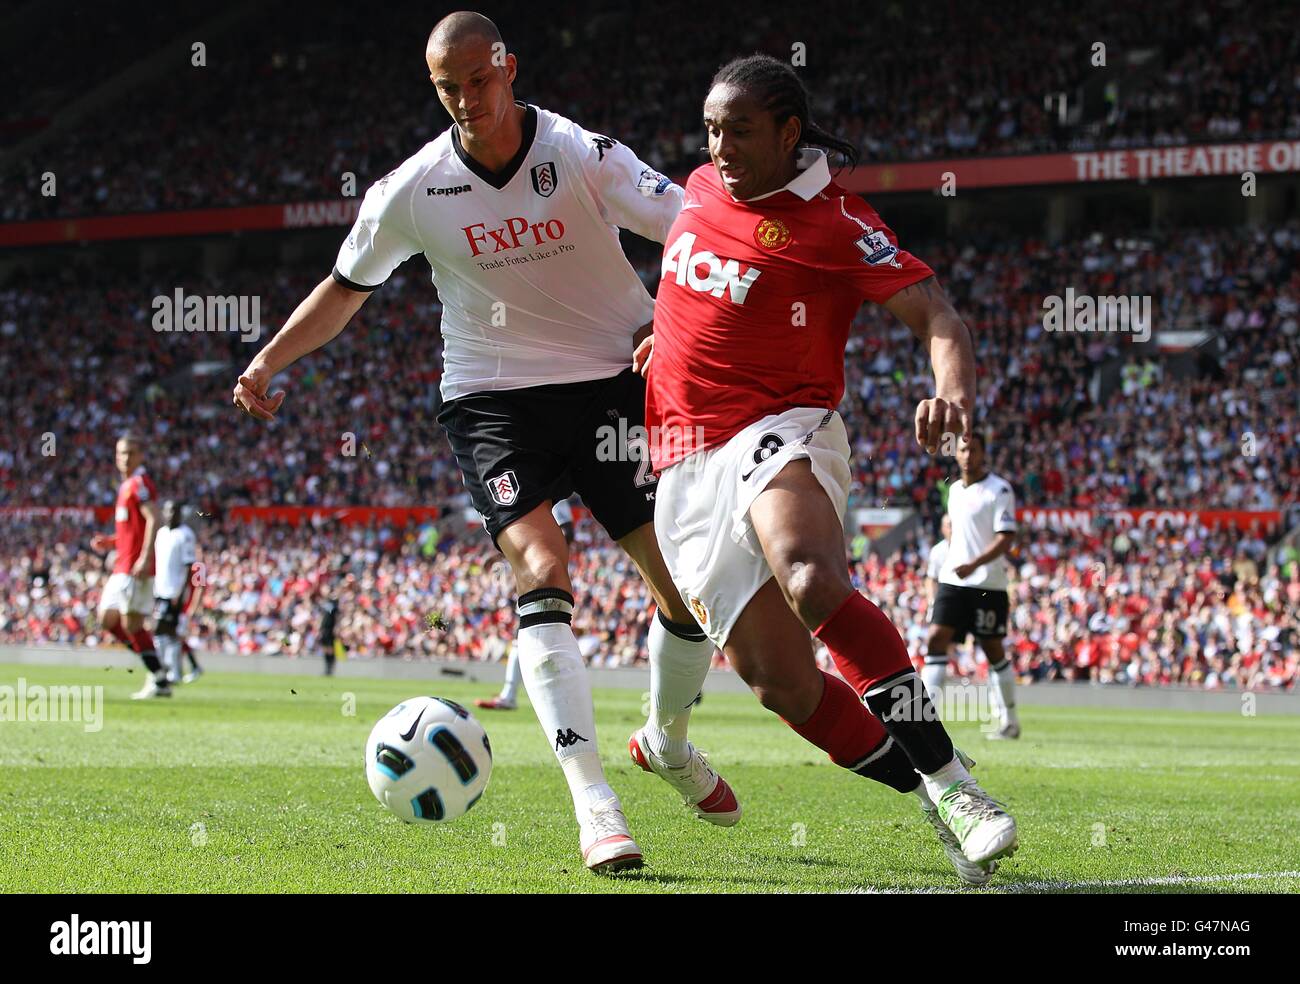 Soccer - Barclays Premier League - Manchester United v Fulham - Old Trafford. Manchester United's Oliveira Anderson (right) and Fulham's Bobby Zamora (left) battle for the ball Stock Photo